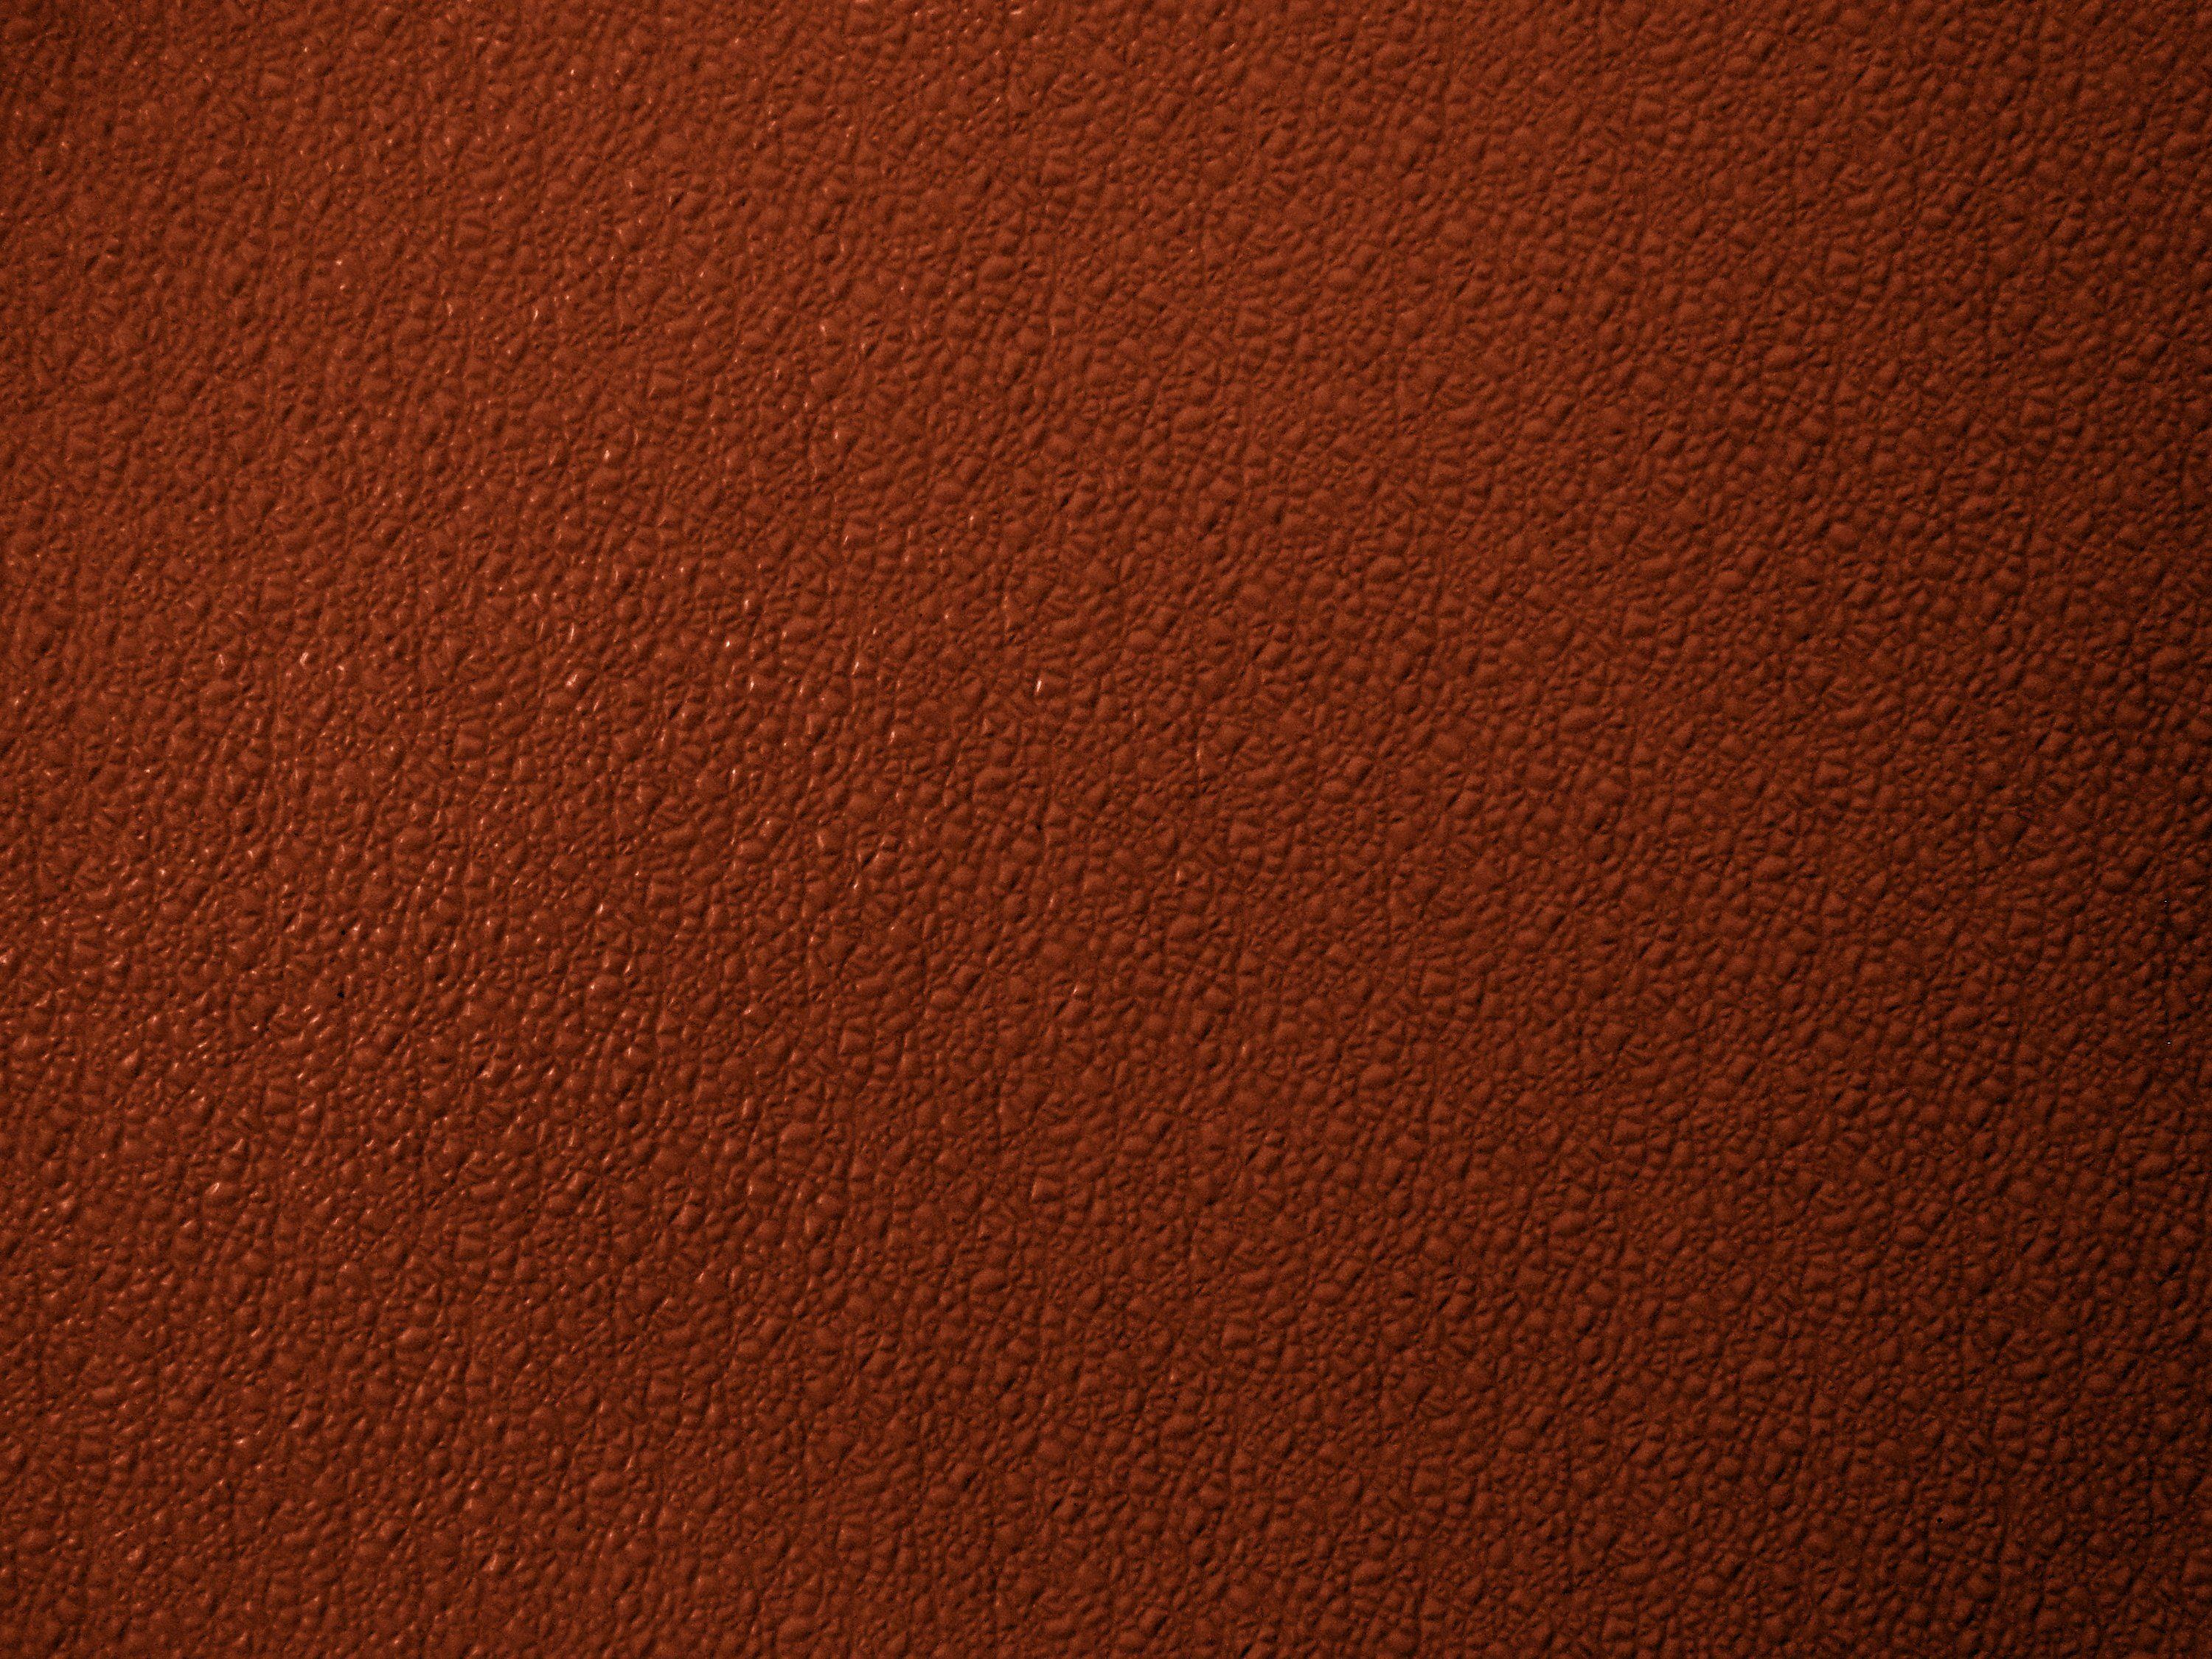 Rust Colored Logo - Bumpy Rust Colored Plastic Texture Picture | Free Photograph ...